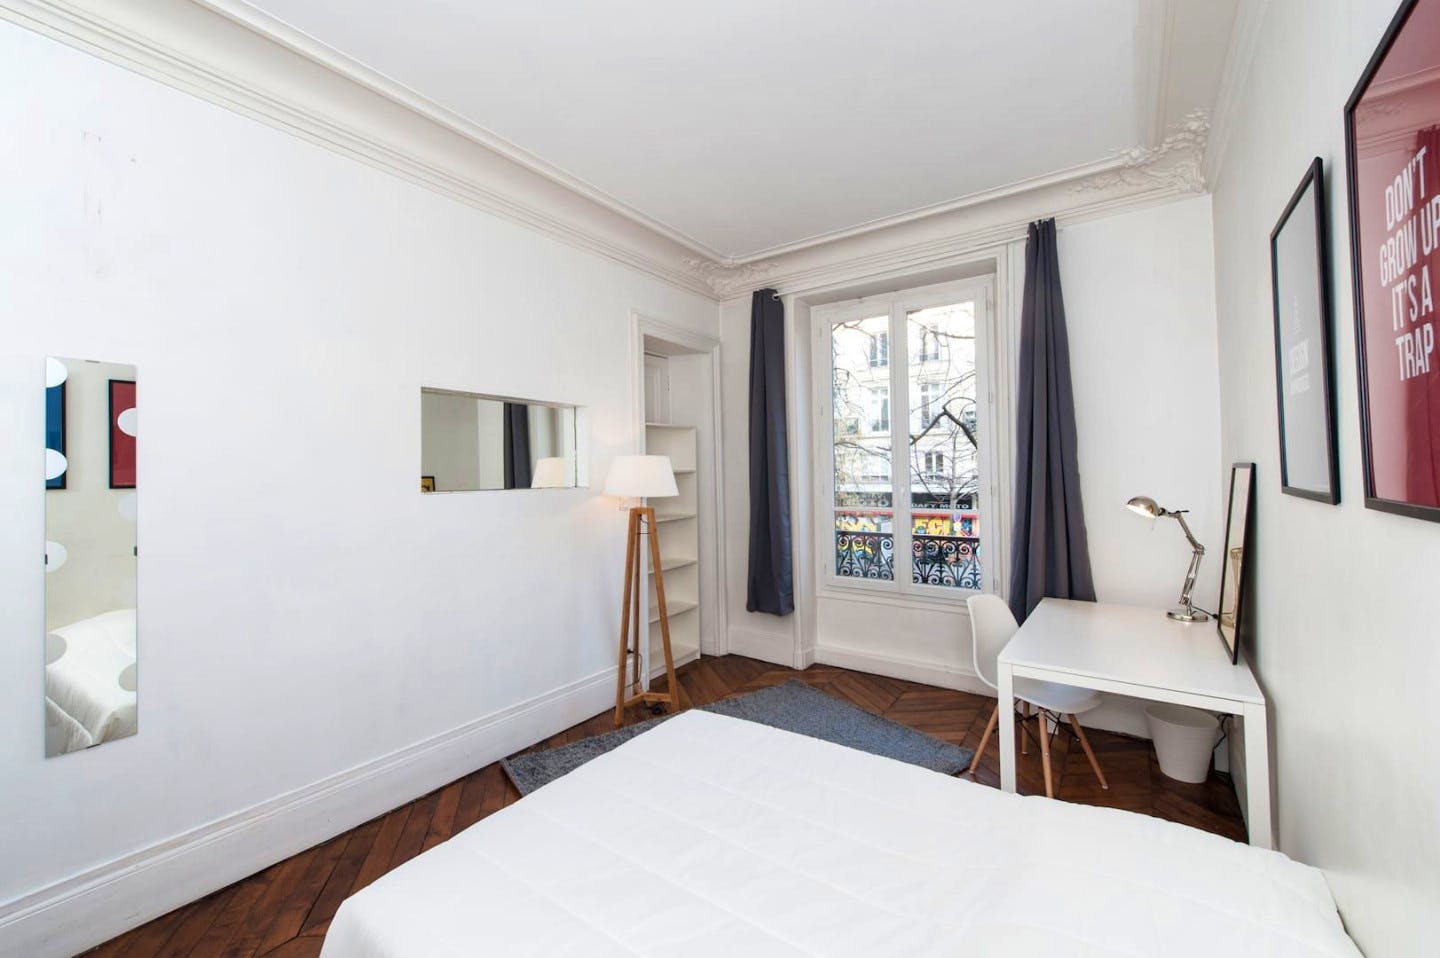 5-Bed Apartment on boulevard Voltaire